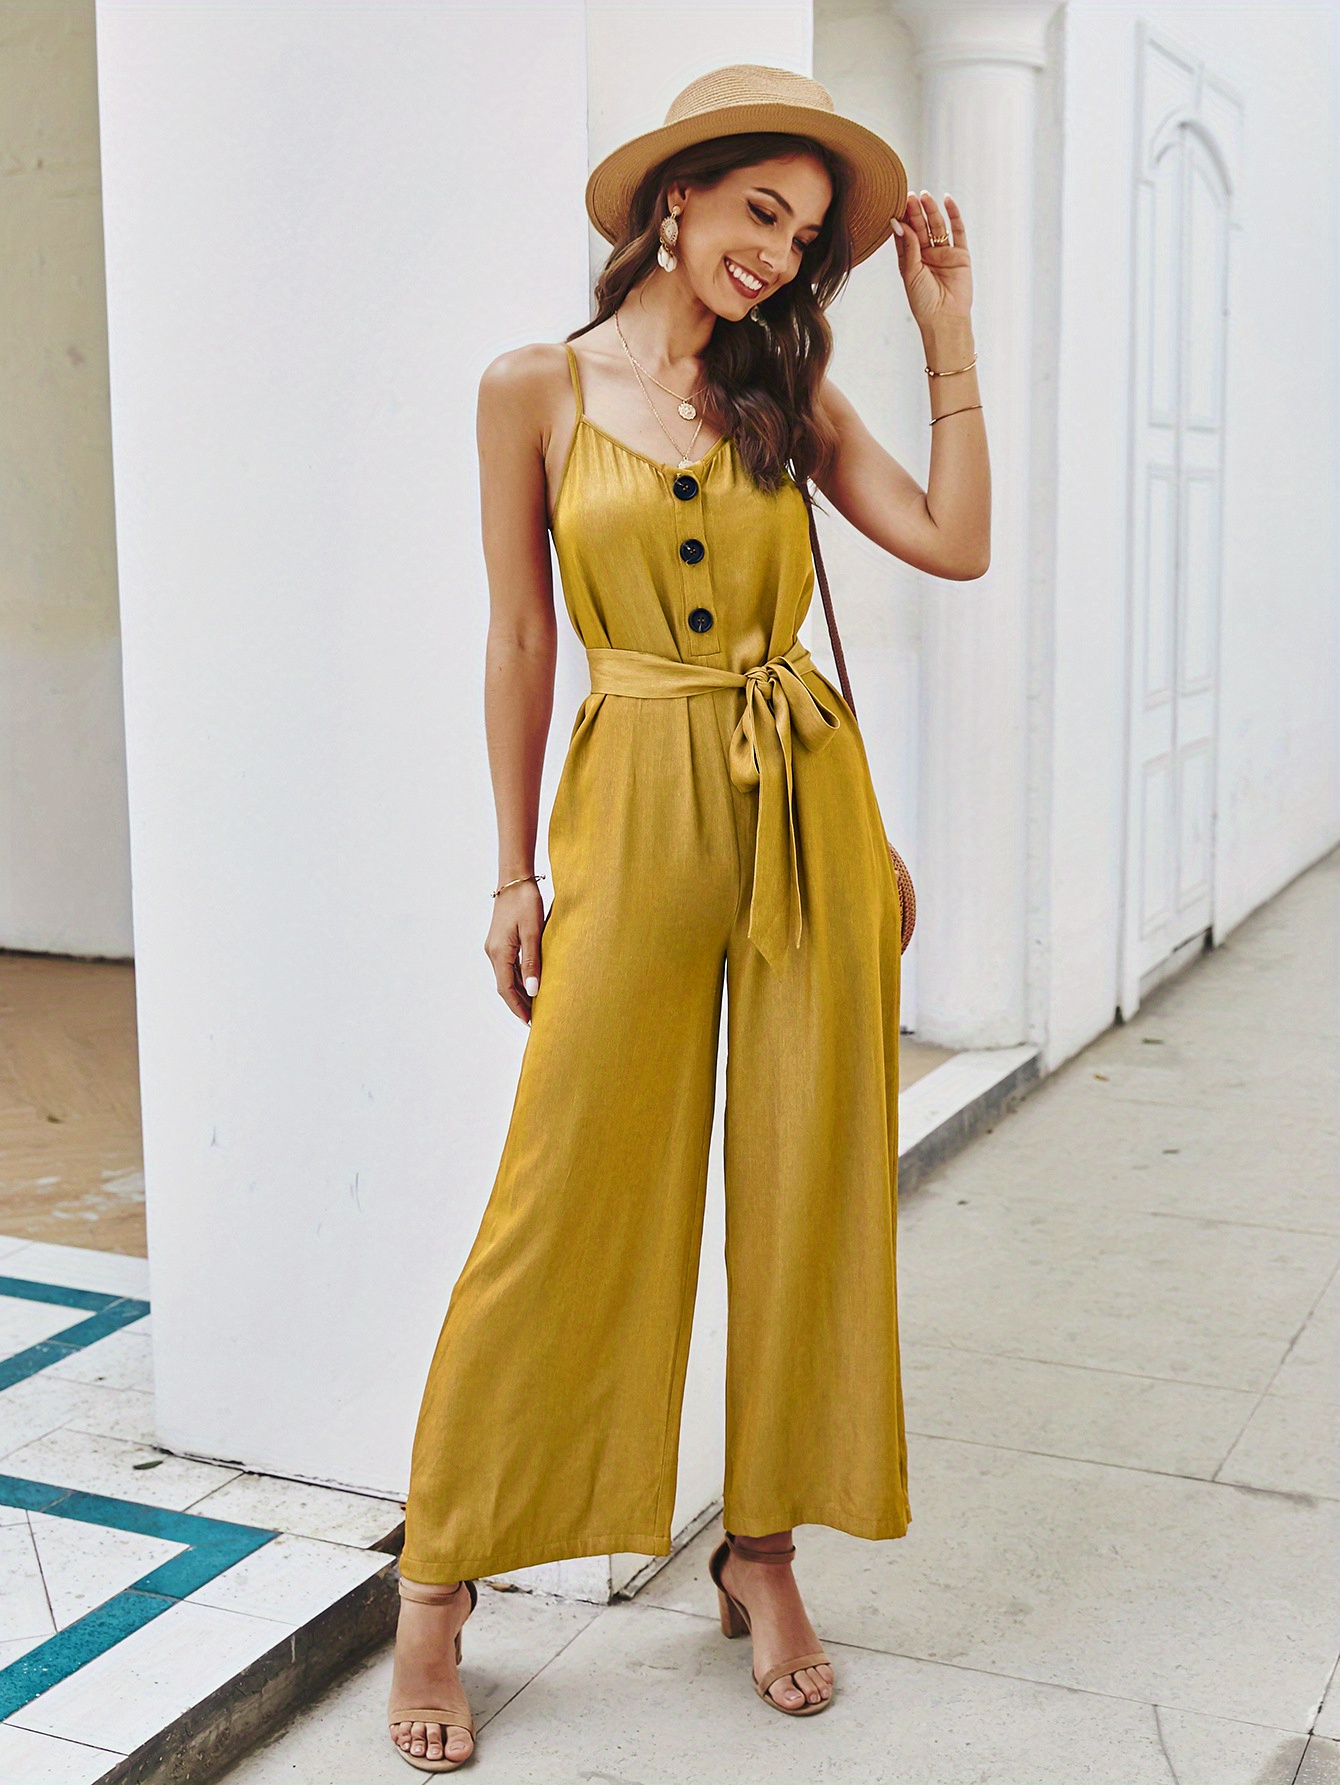 Mustard Wide Leg Pants with Ballerina Shoes Outfits (2 ideas